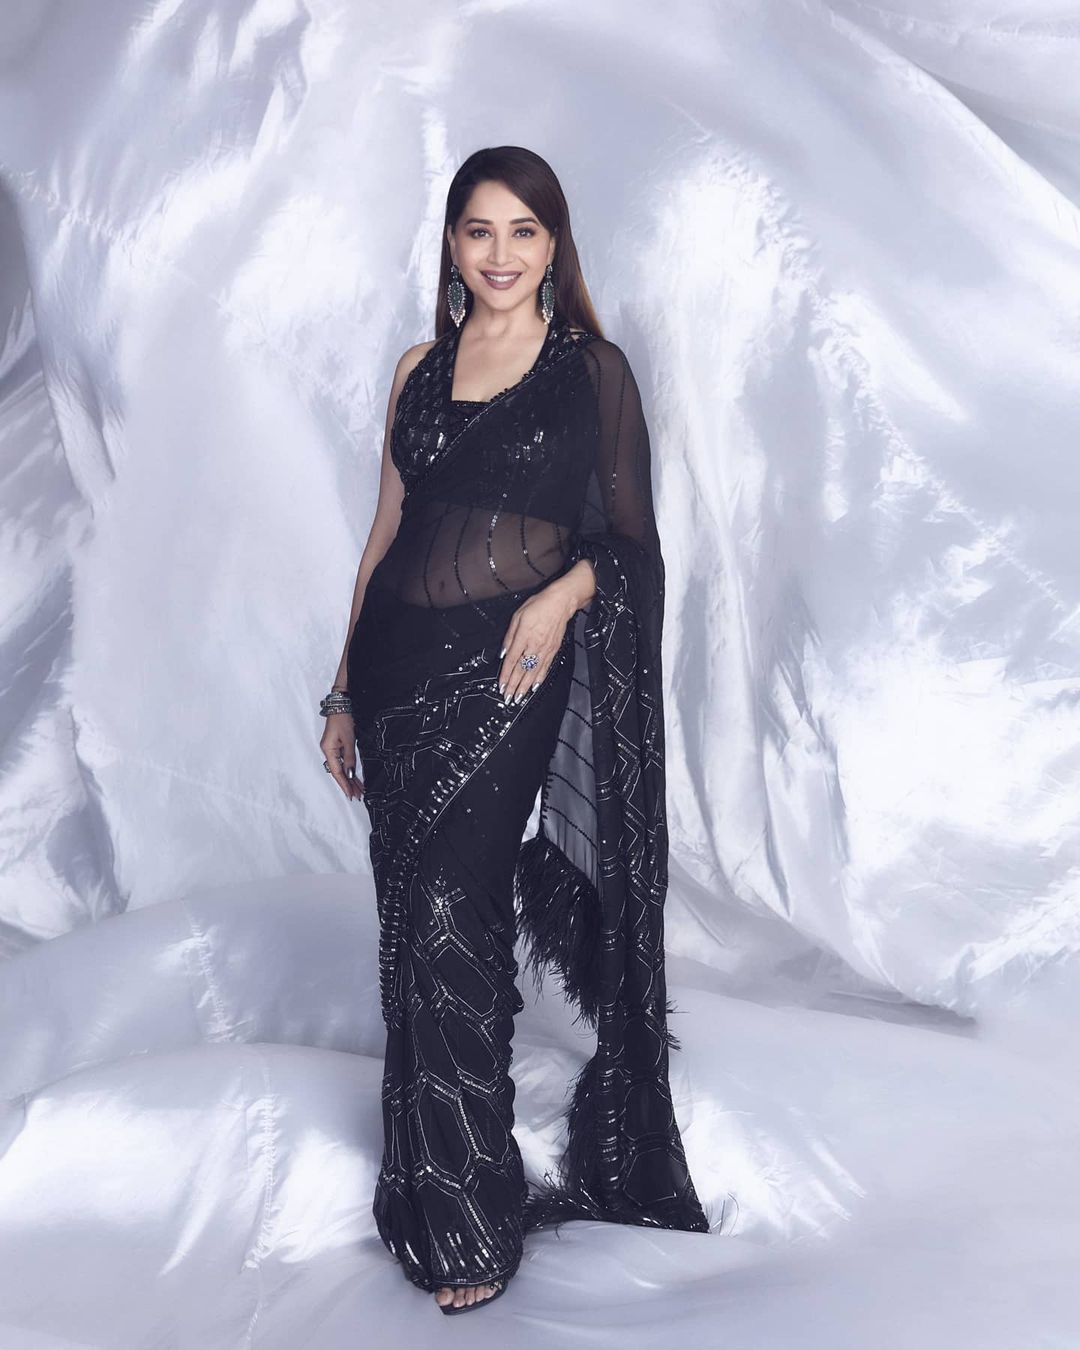 Madhuri Dixit Nene in a sheer balck saree is 'too glam to give a damn.' 